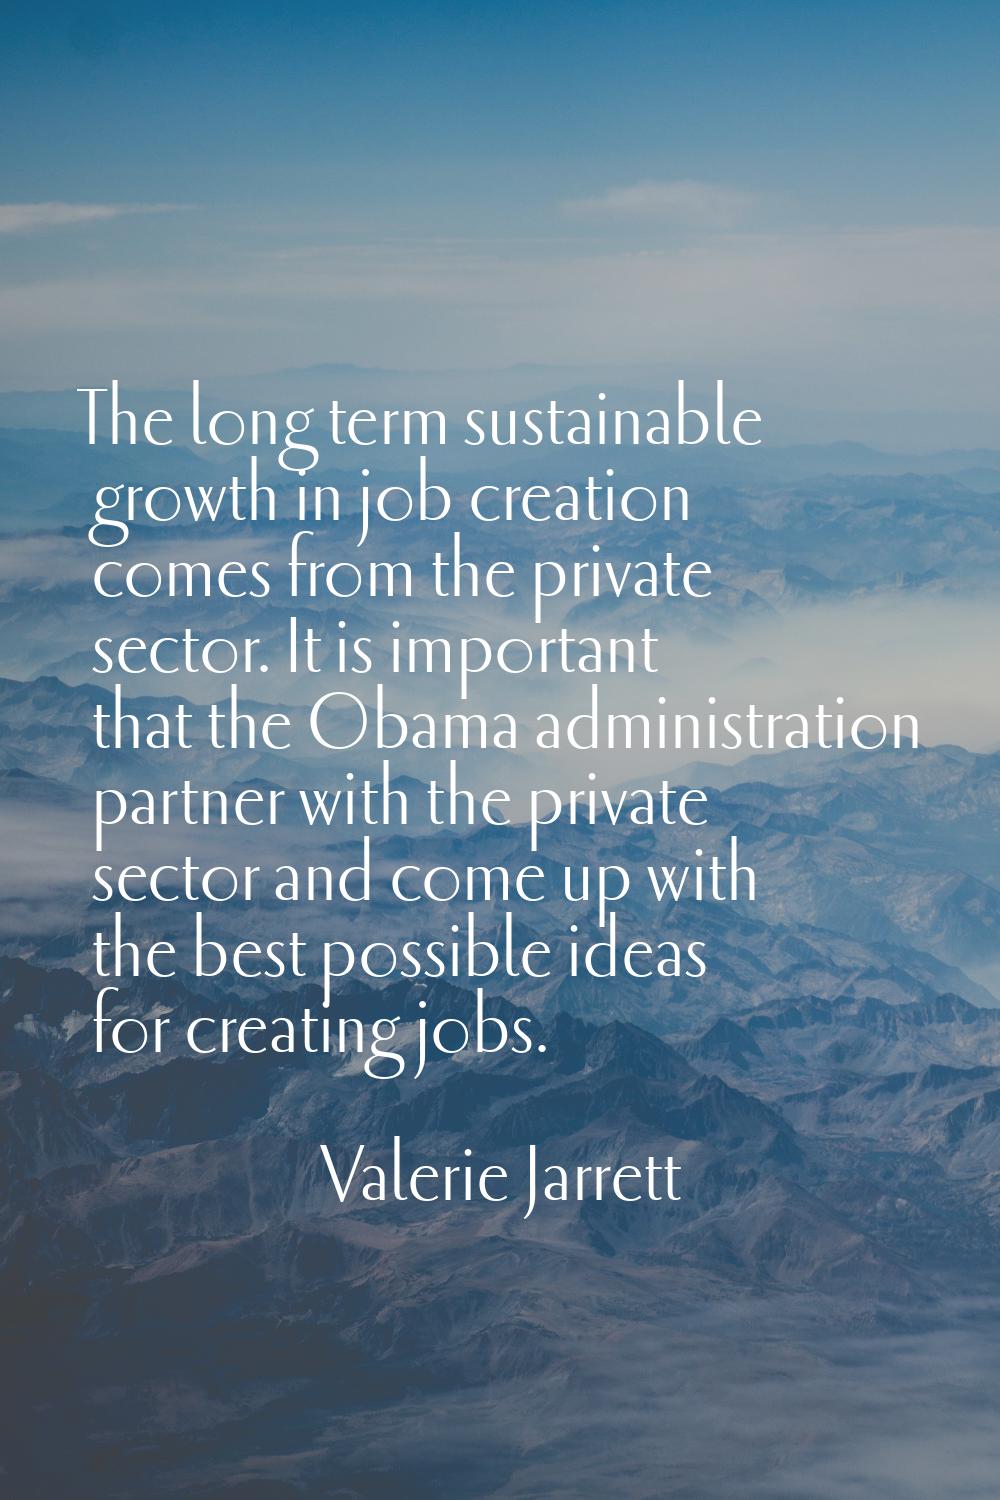 The long term sustainable growth in job creation comes from the private sector. It is important tha